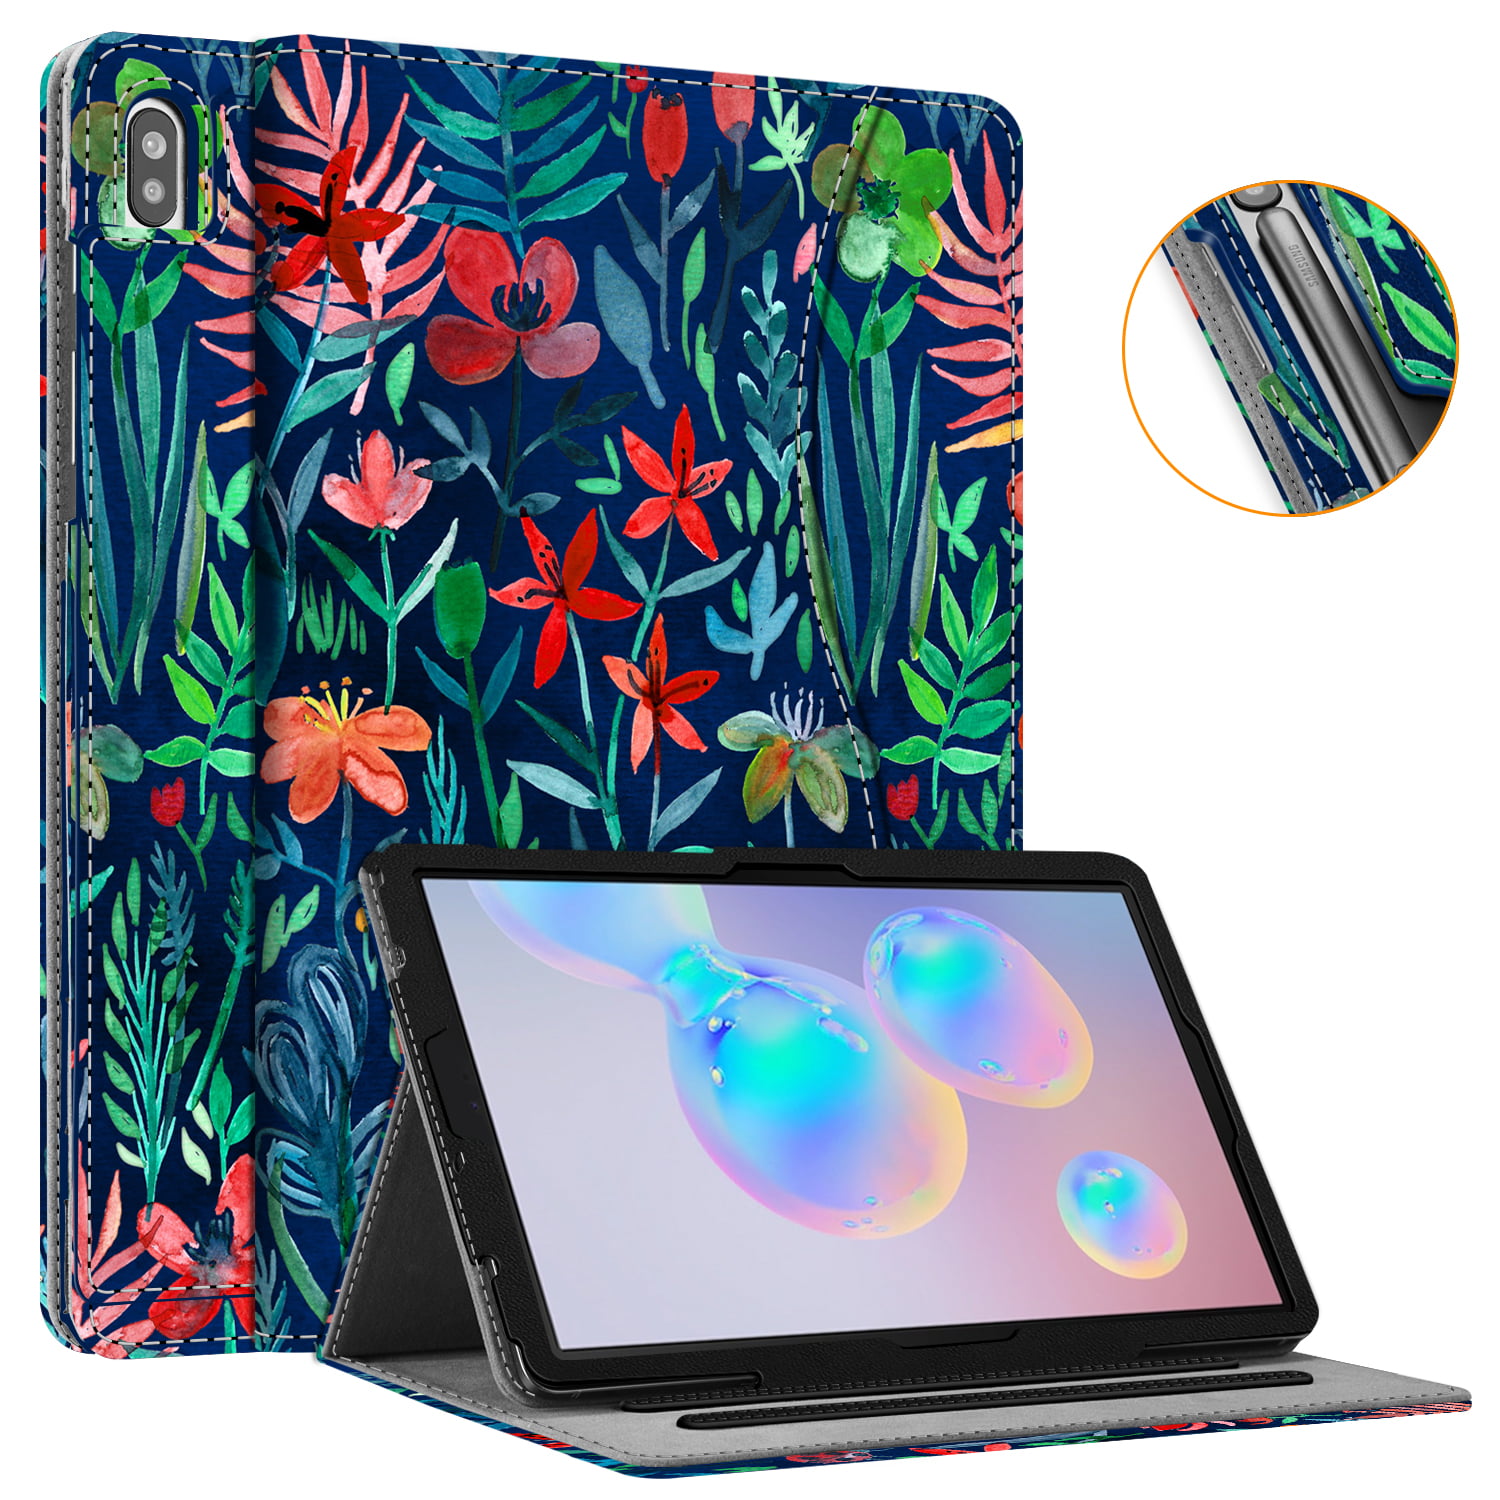 Fintie Case for Samsung Galaxy Tab S6 10.5" 2019, MultiAngle Viewing Stand Cover Wake/Sleep